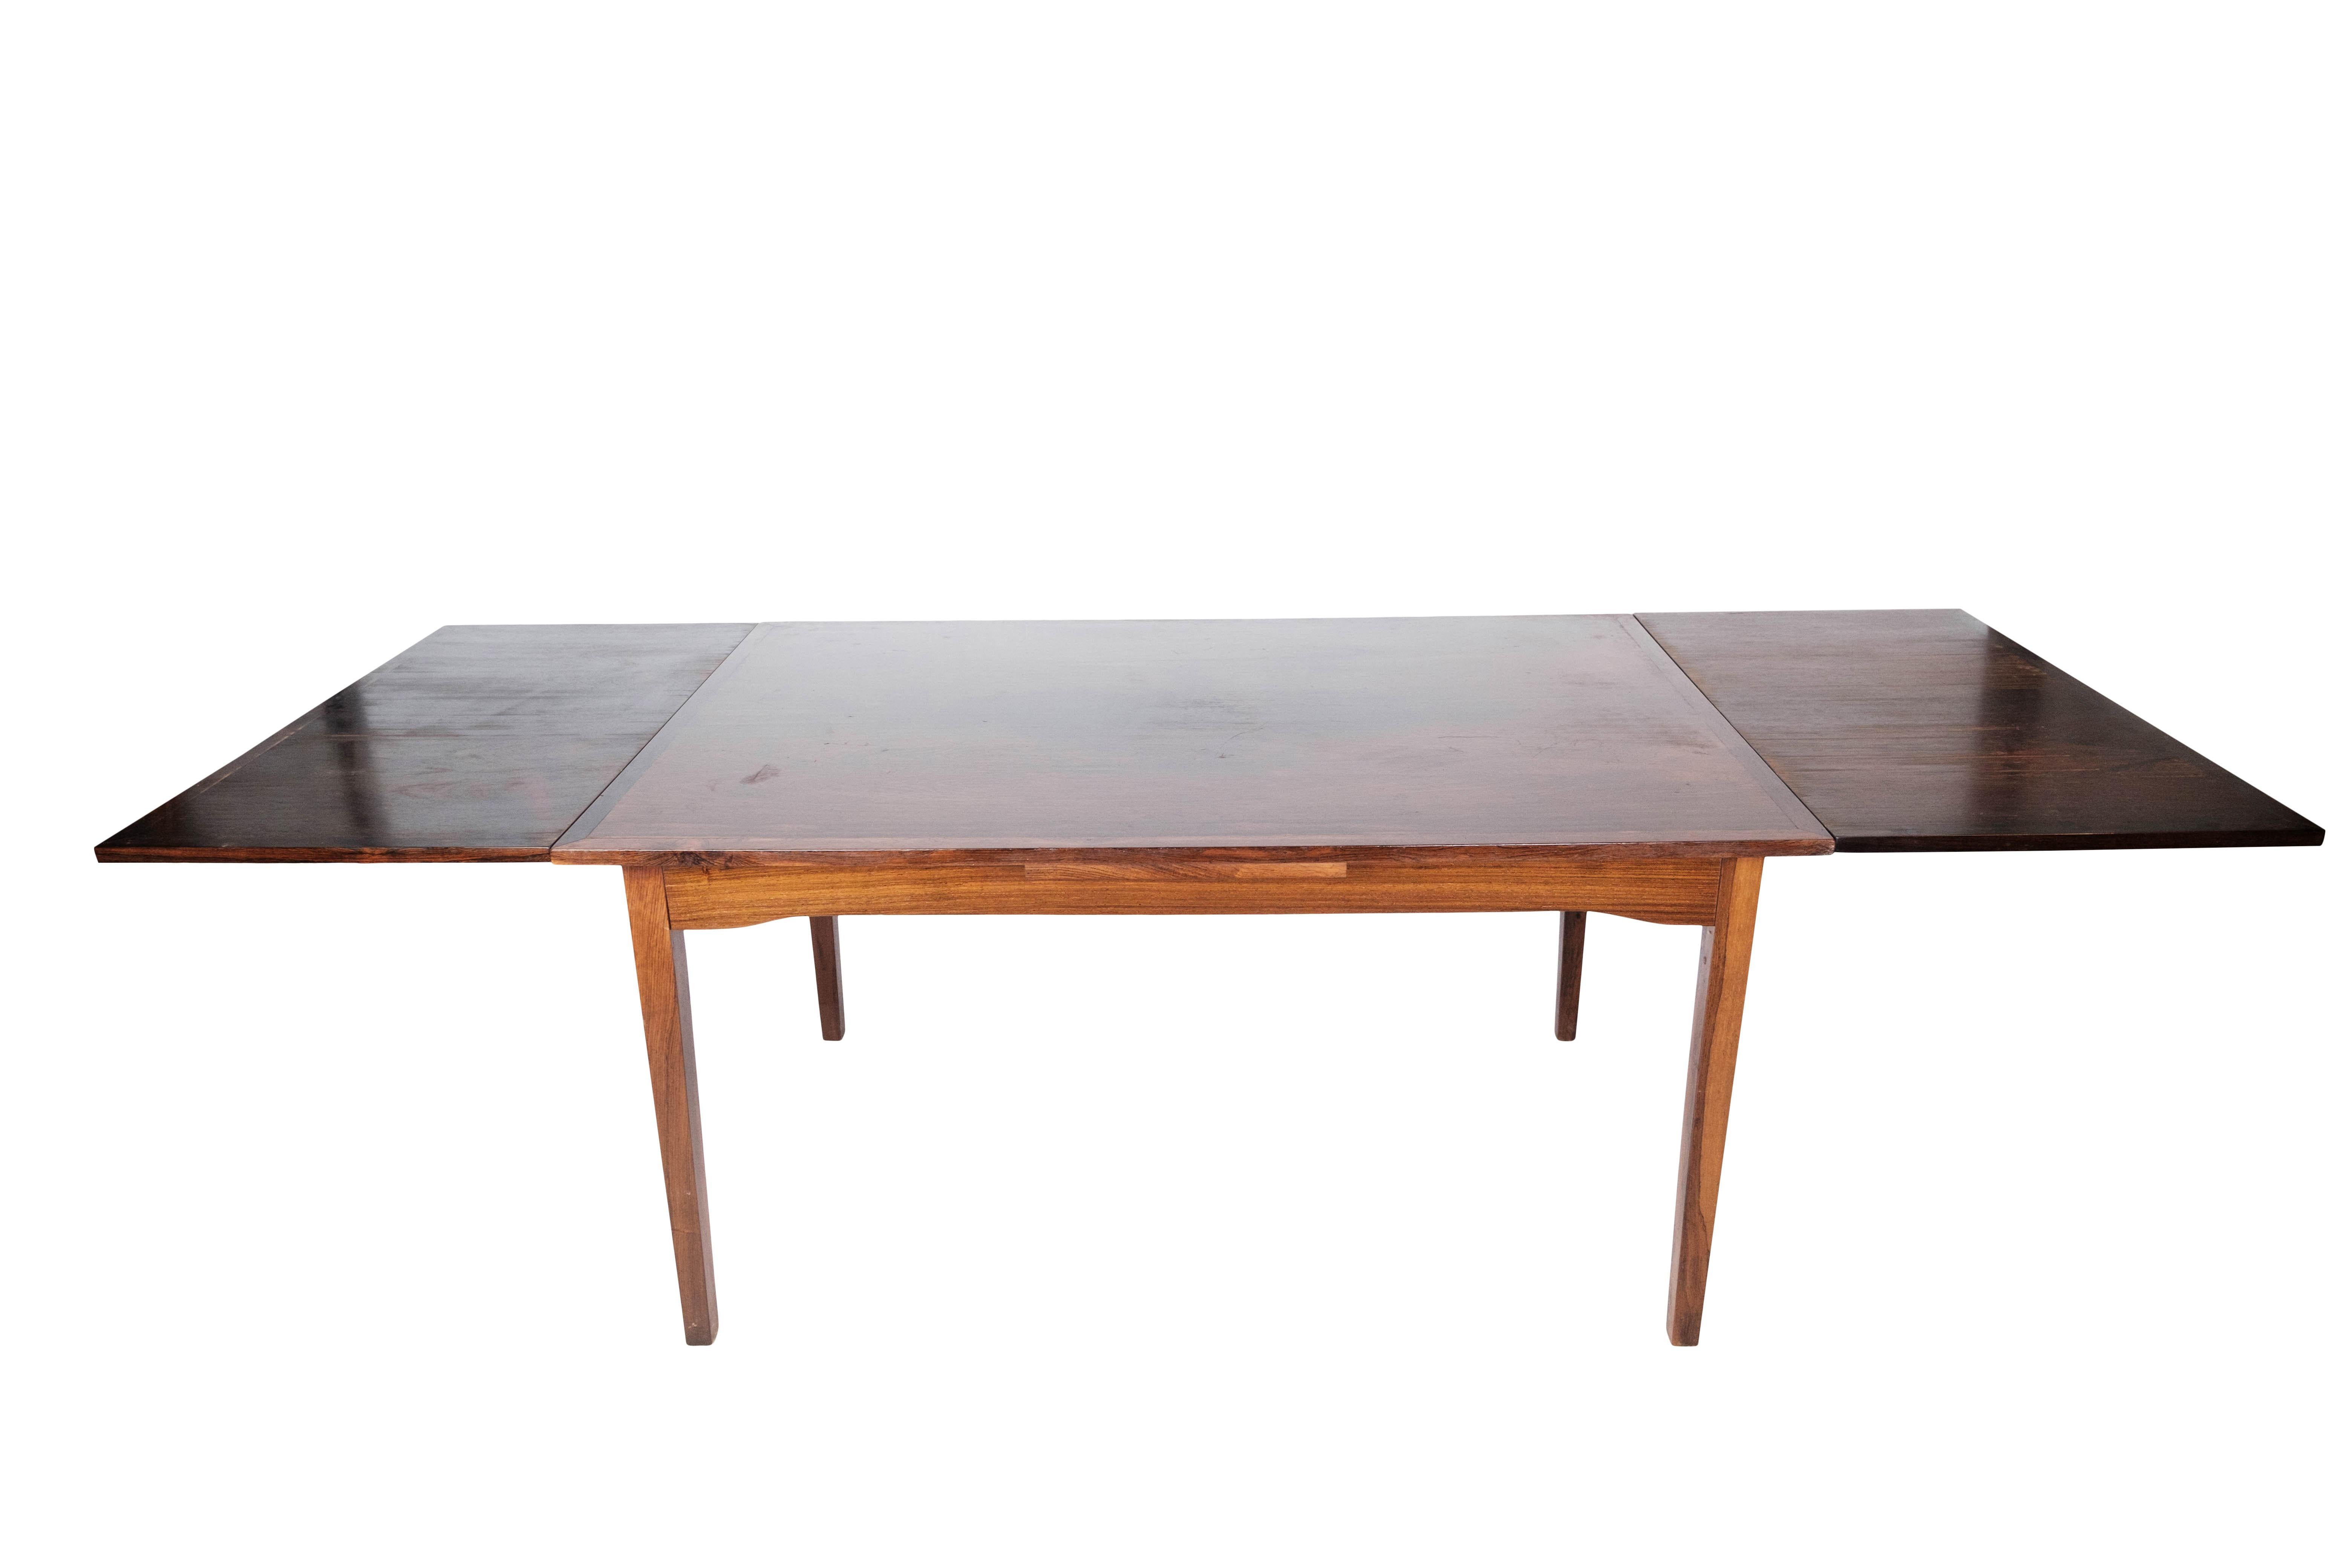 This 1960s rosewood dining table is a beautiful and functional addition to any dining room. With its simple design and pull-out function, it offers extra space for your guests when needed.

Behind this table stands Ellegaards Møbelfabrik, a